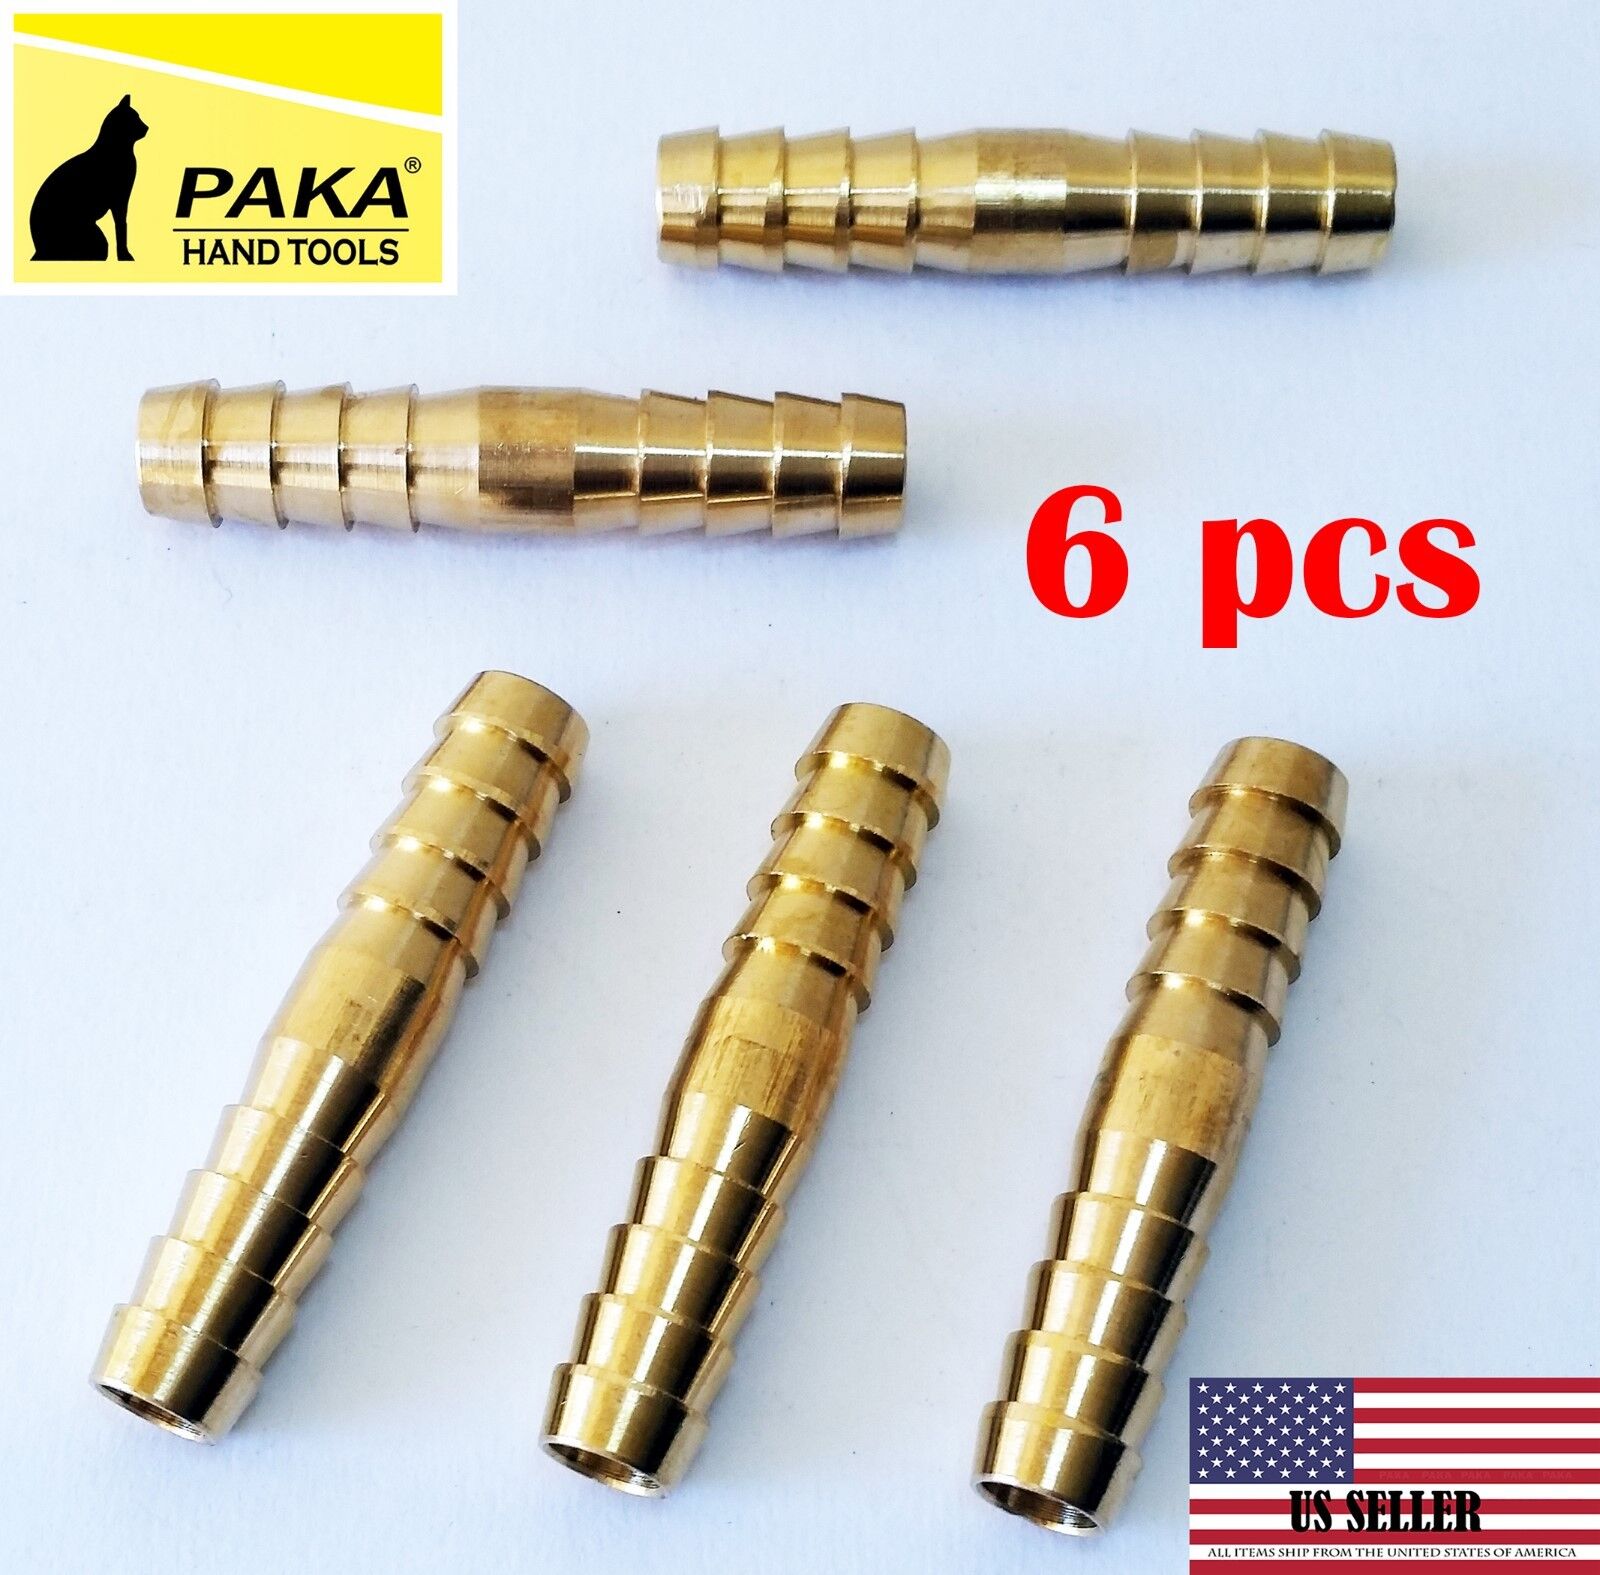 6 PC - 3/8" Hose Barb Mender Union Splicer Brass Fitting Gas Fuel Water Paka Tools Does Not Apply